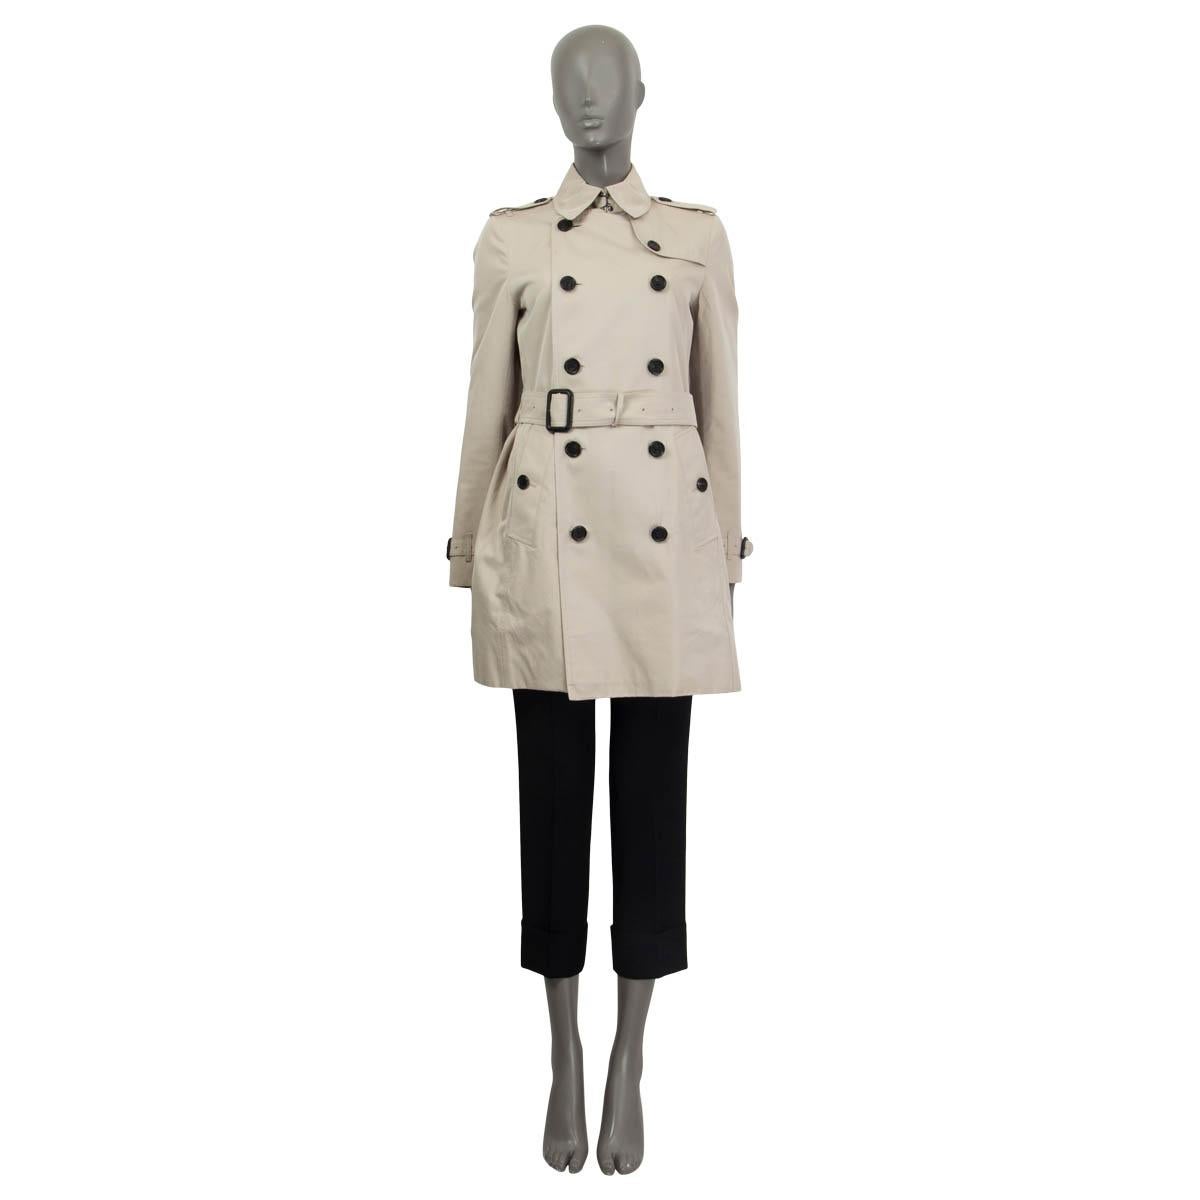 100% authentic Burberry belted double breasted trench coat in light sand cotton (100%) with shoulders and cuffs epaulettes and a detachable belt. Features two buttoned pockets on the front. Closes with one hook and one button at the neck and four